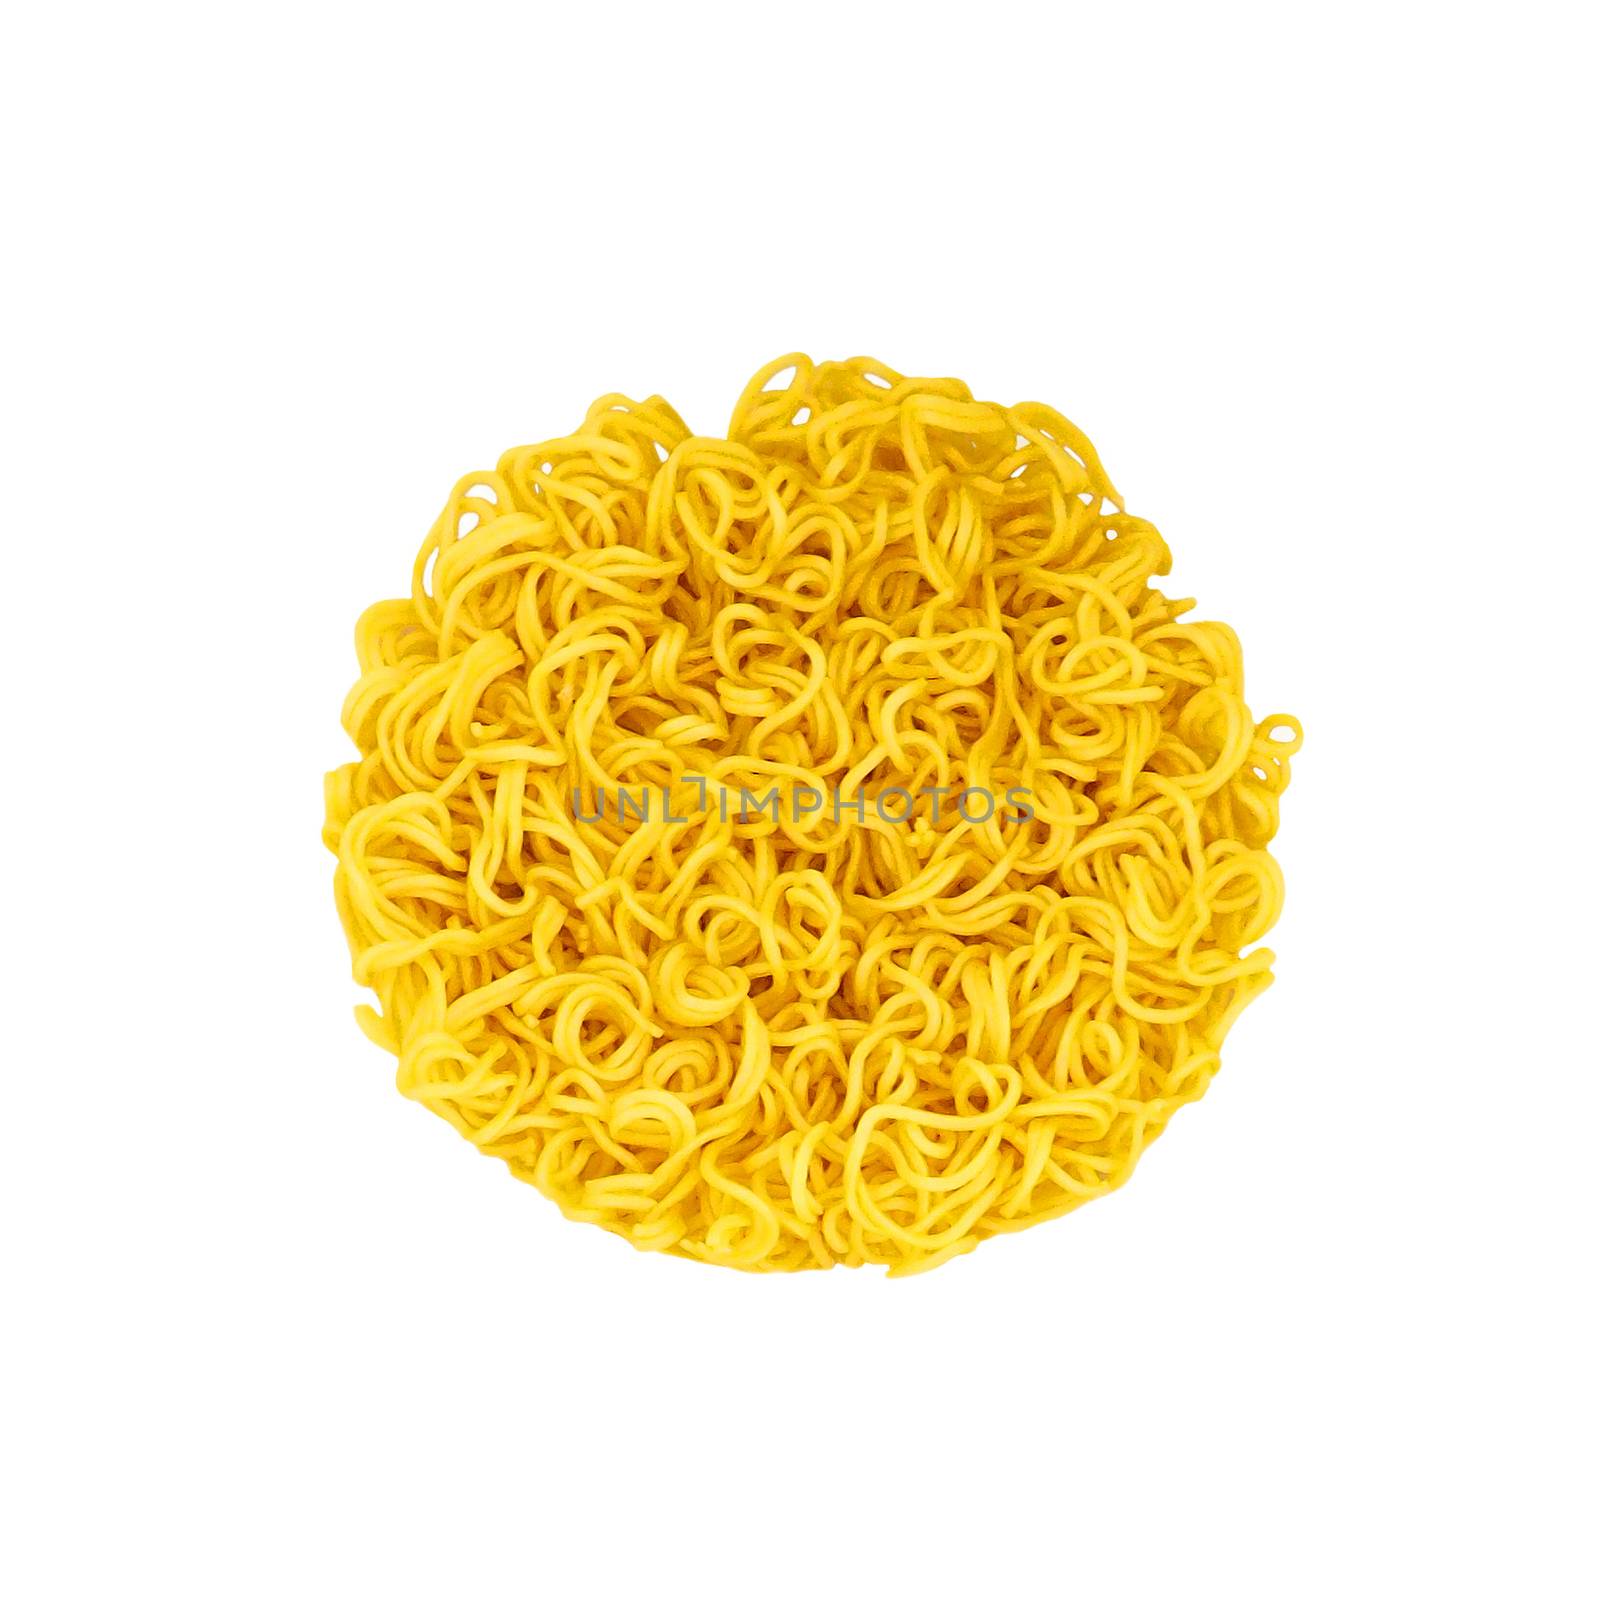 Yellow instant noodle and white background and isolated.